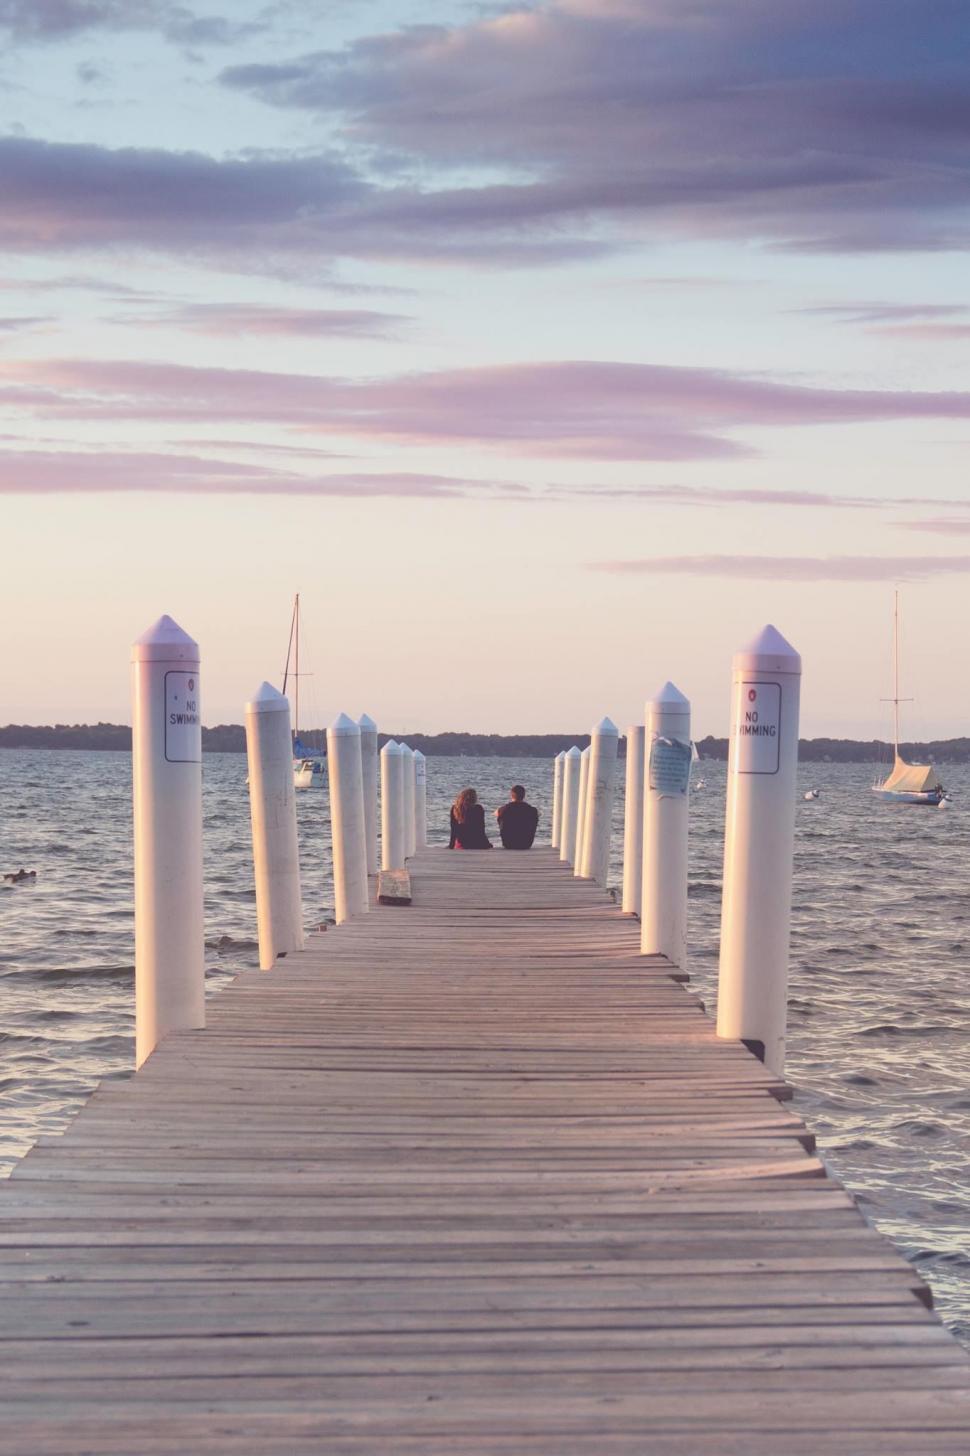 Free Image of Long View of Pier with Couple and sailboat  